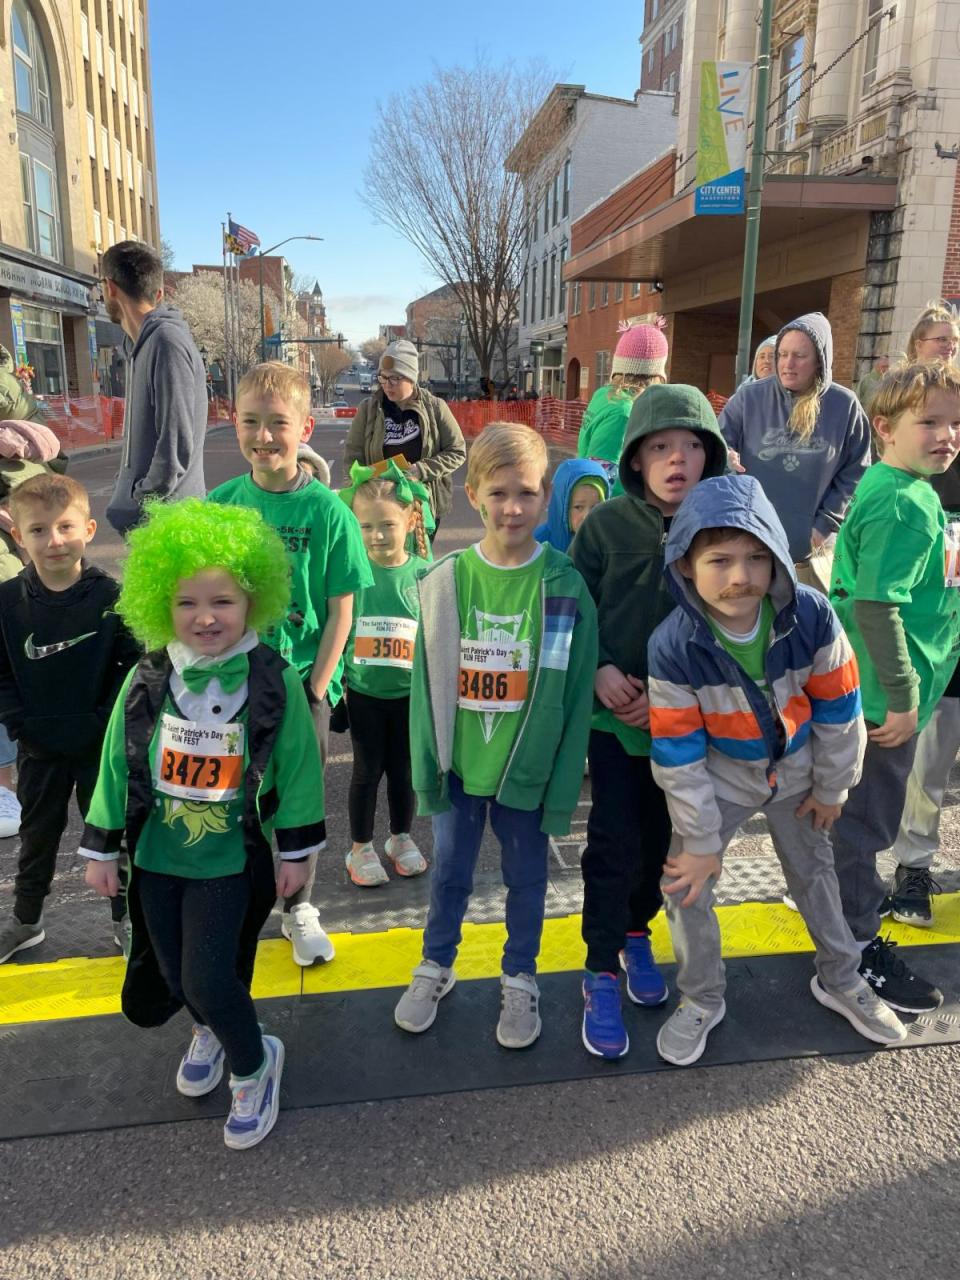 The St. Patrick's Day Run Fest will be held Saturday, March 16, begining at 8:45 a.m. in downtown Hagerstown.